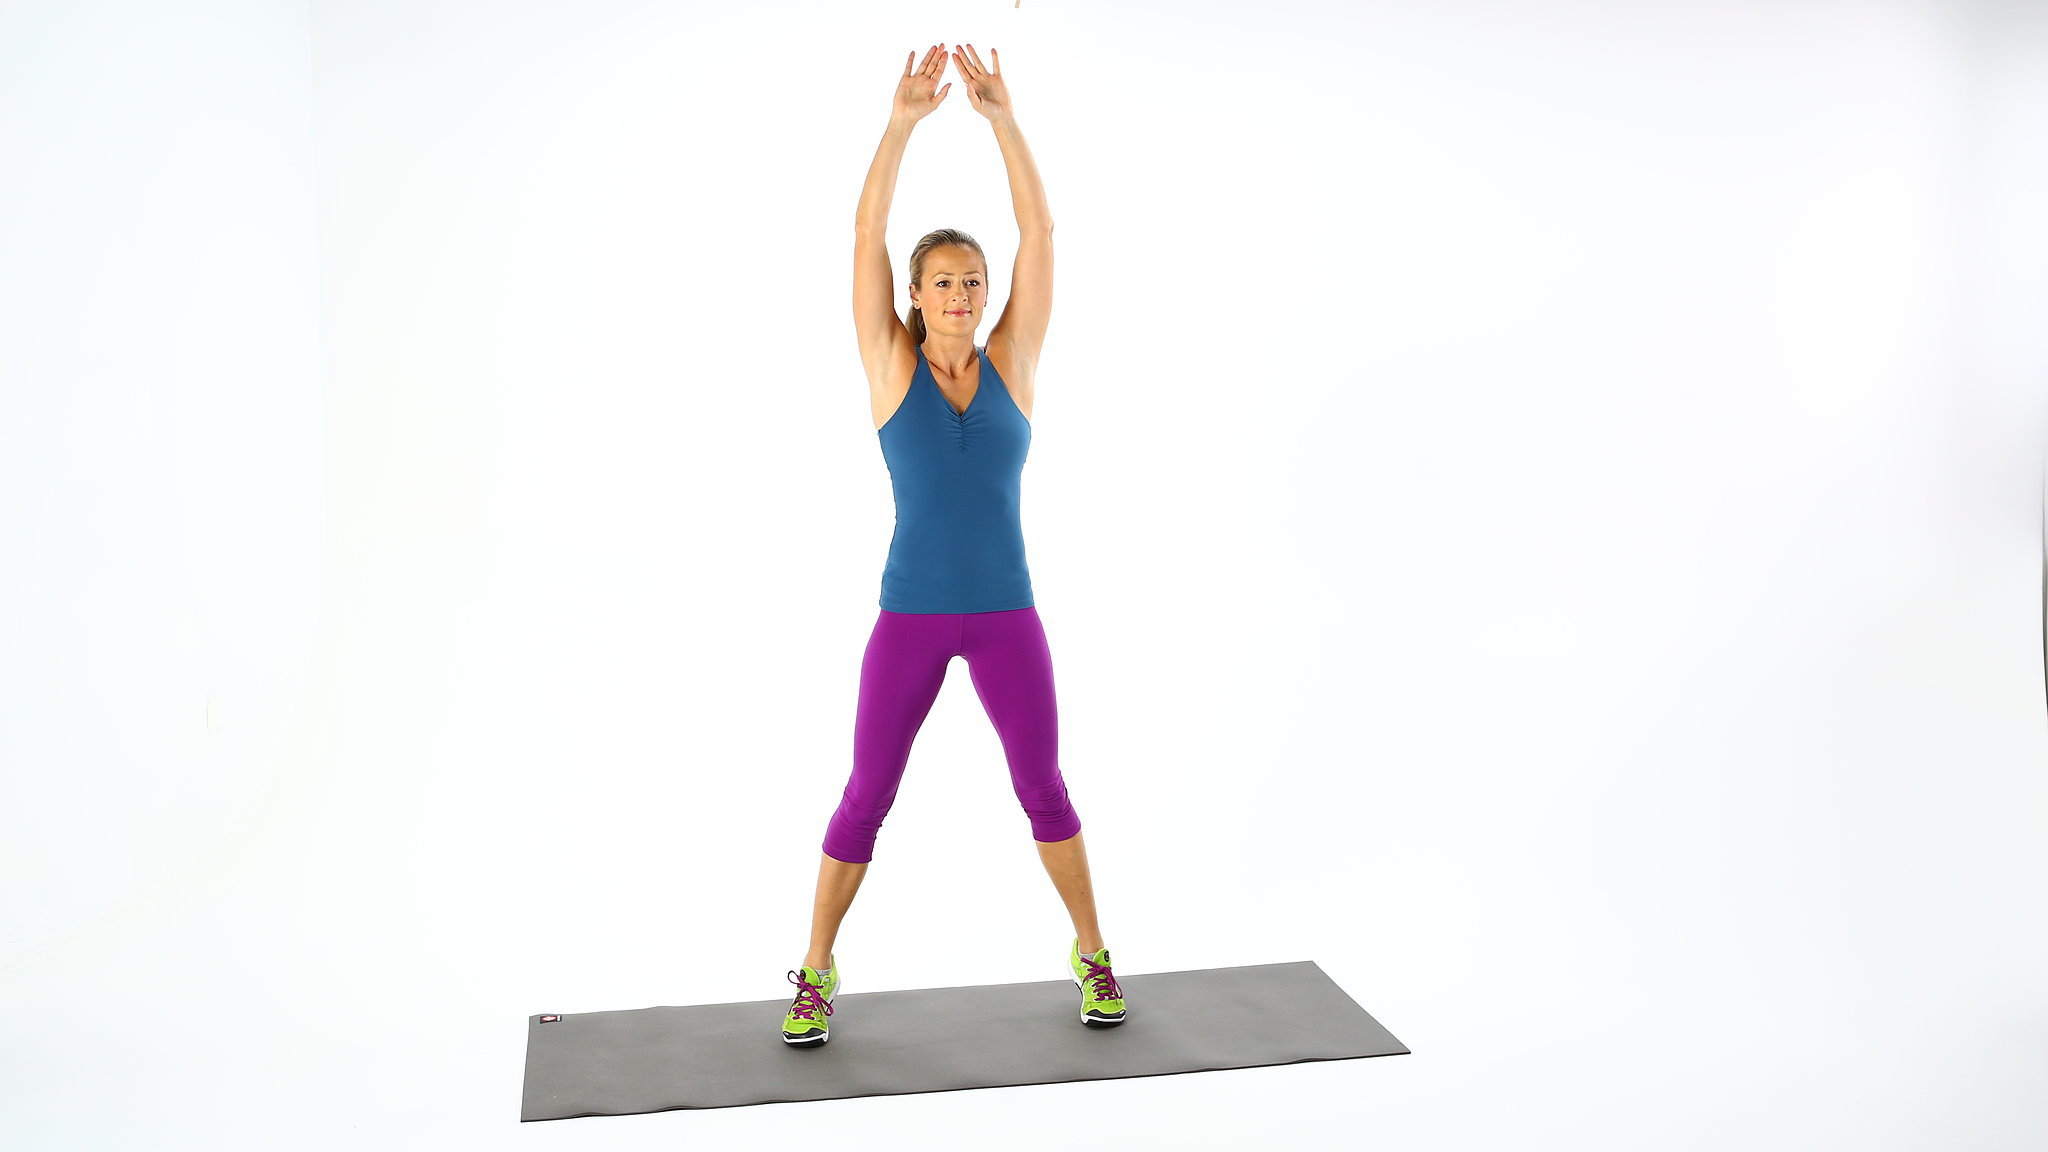 Jumping Jacks This 7 Minute Workout Targets Belly Fat Popsugar Fitness